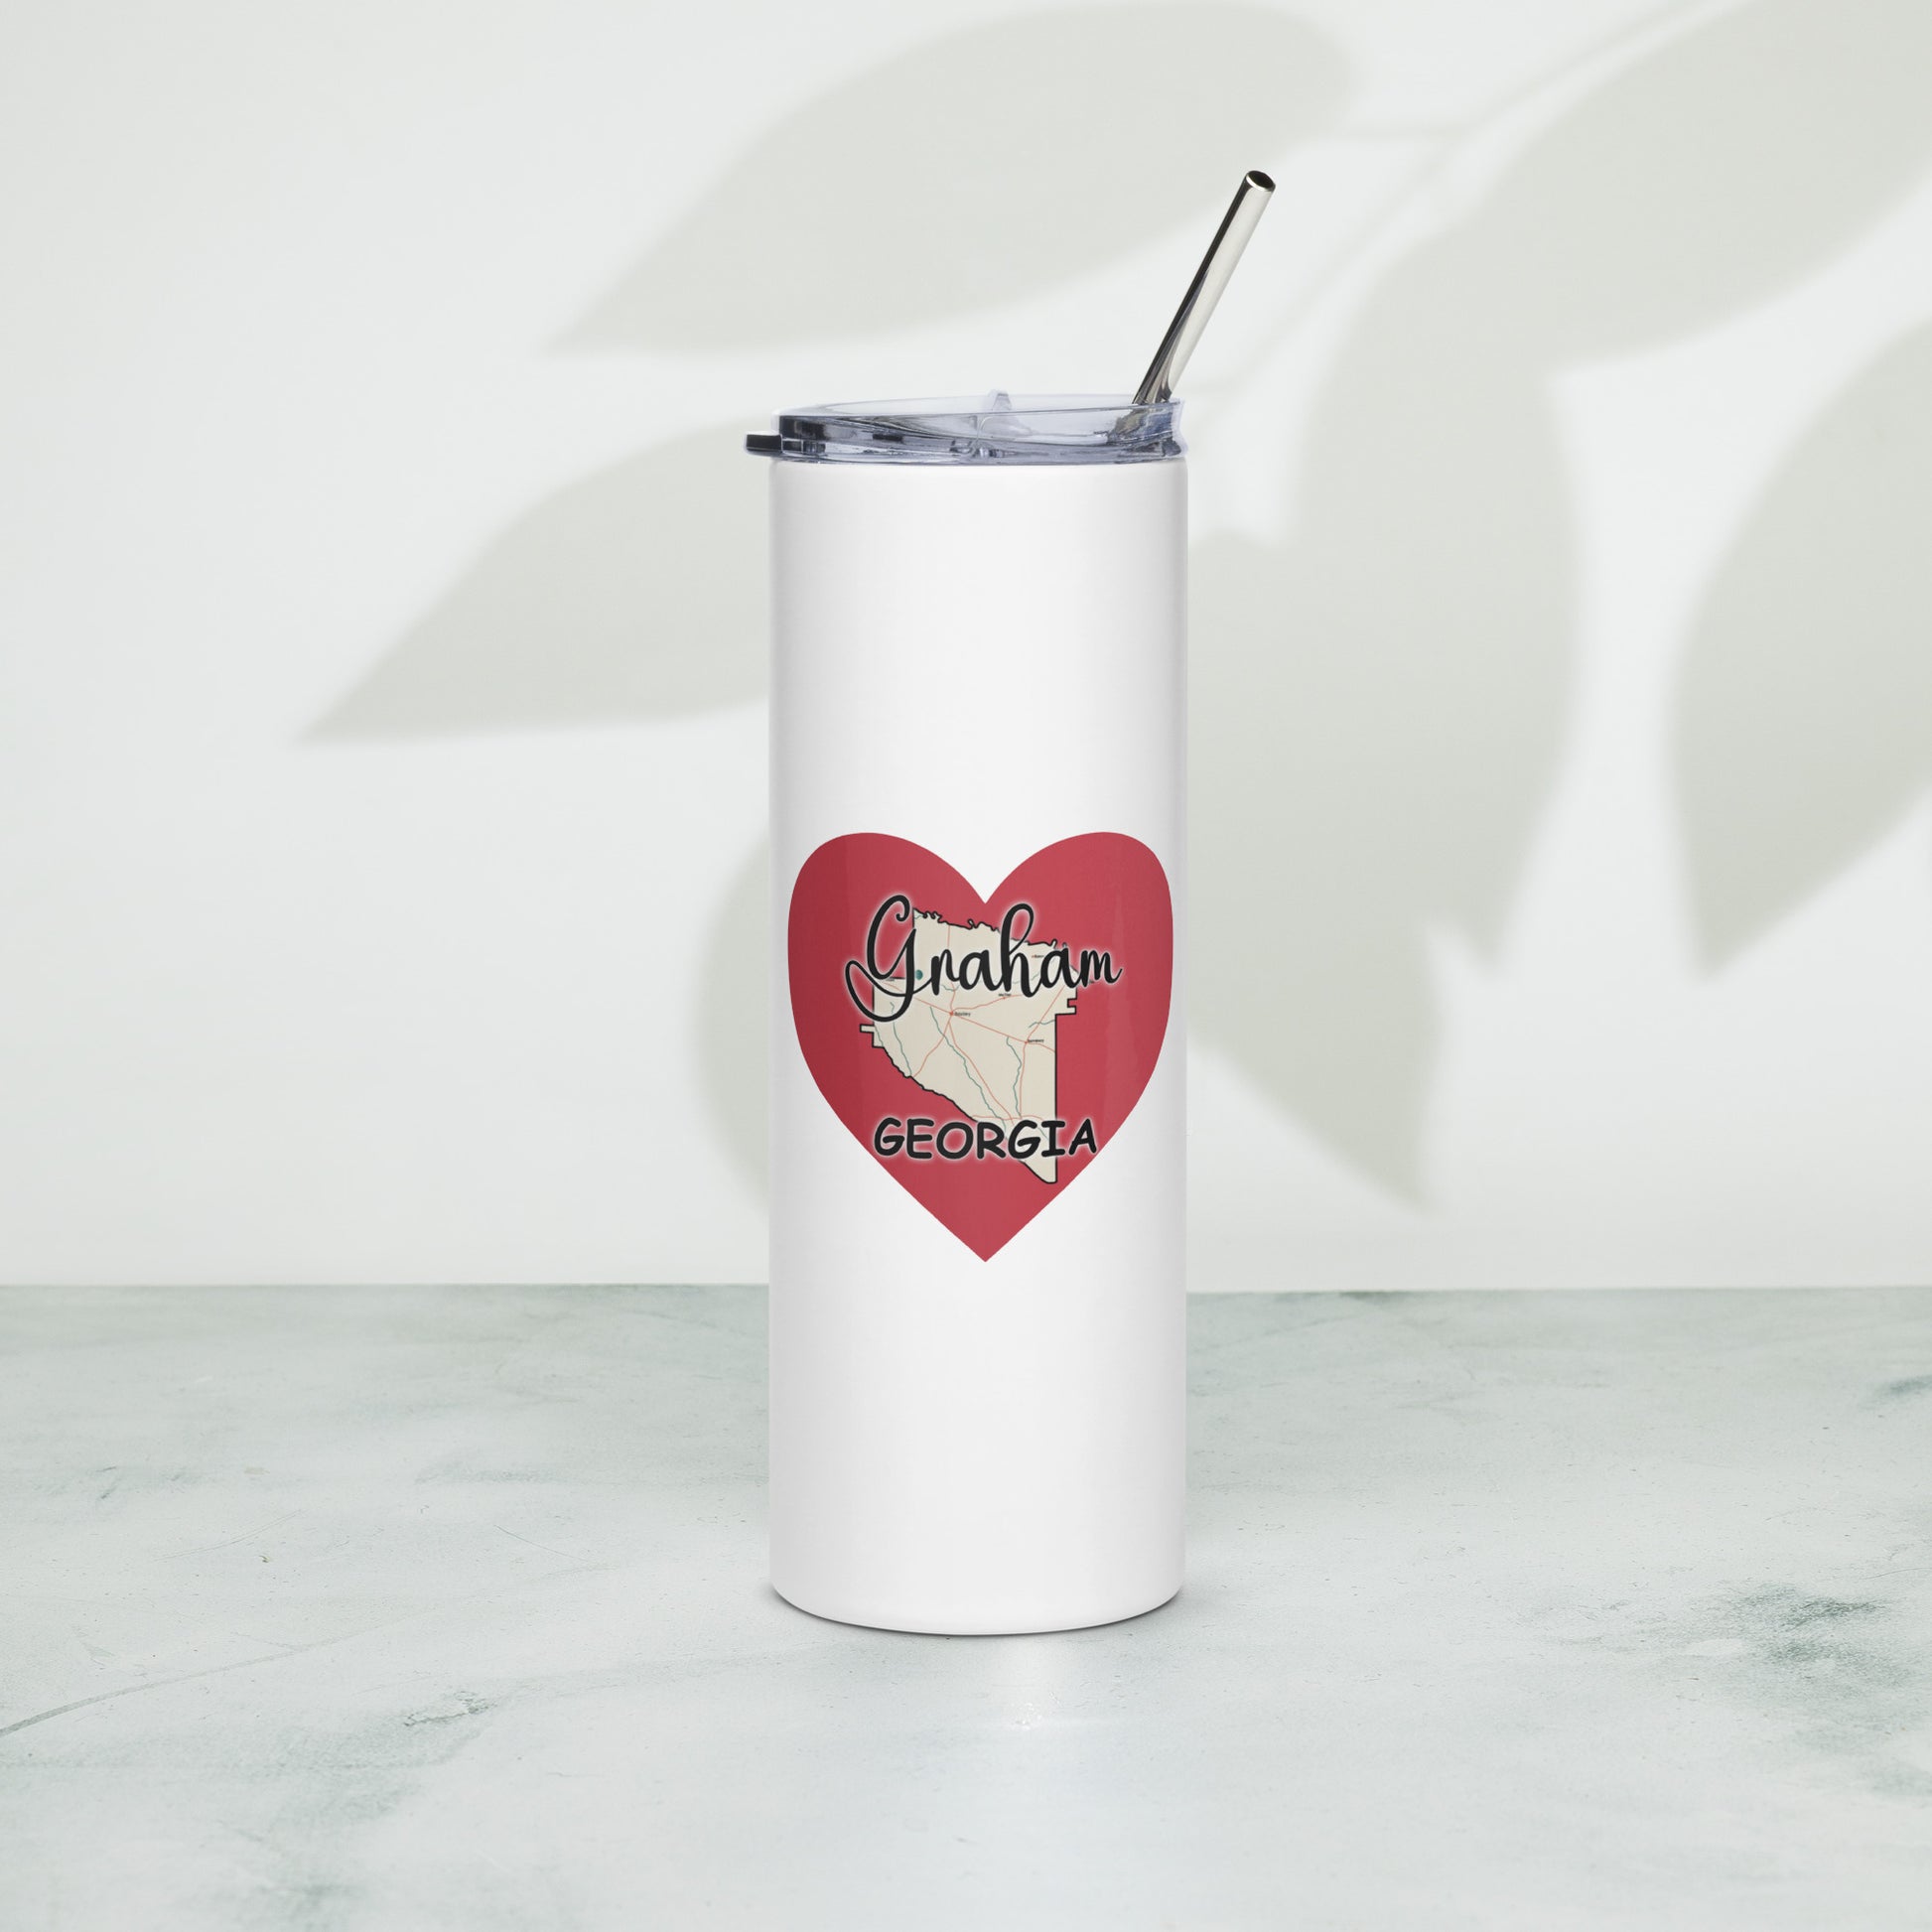 Graham Georgia County Map on Large Heart Stainless Steel Tumbler 20 oz (600 ml)